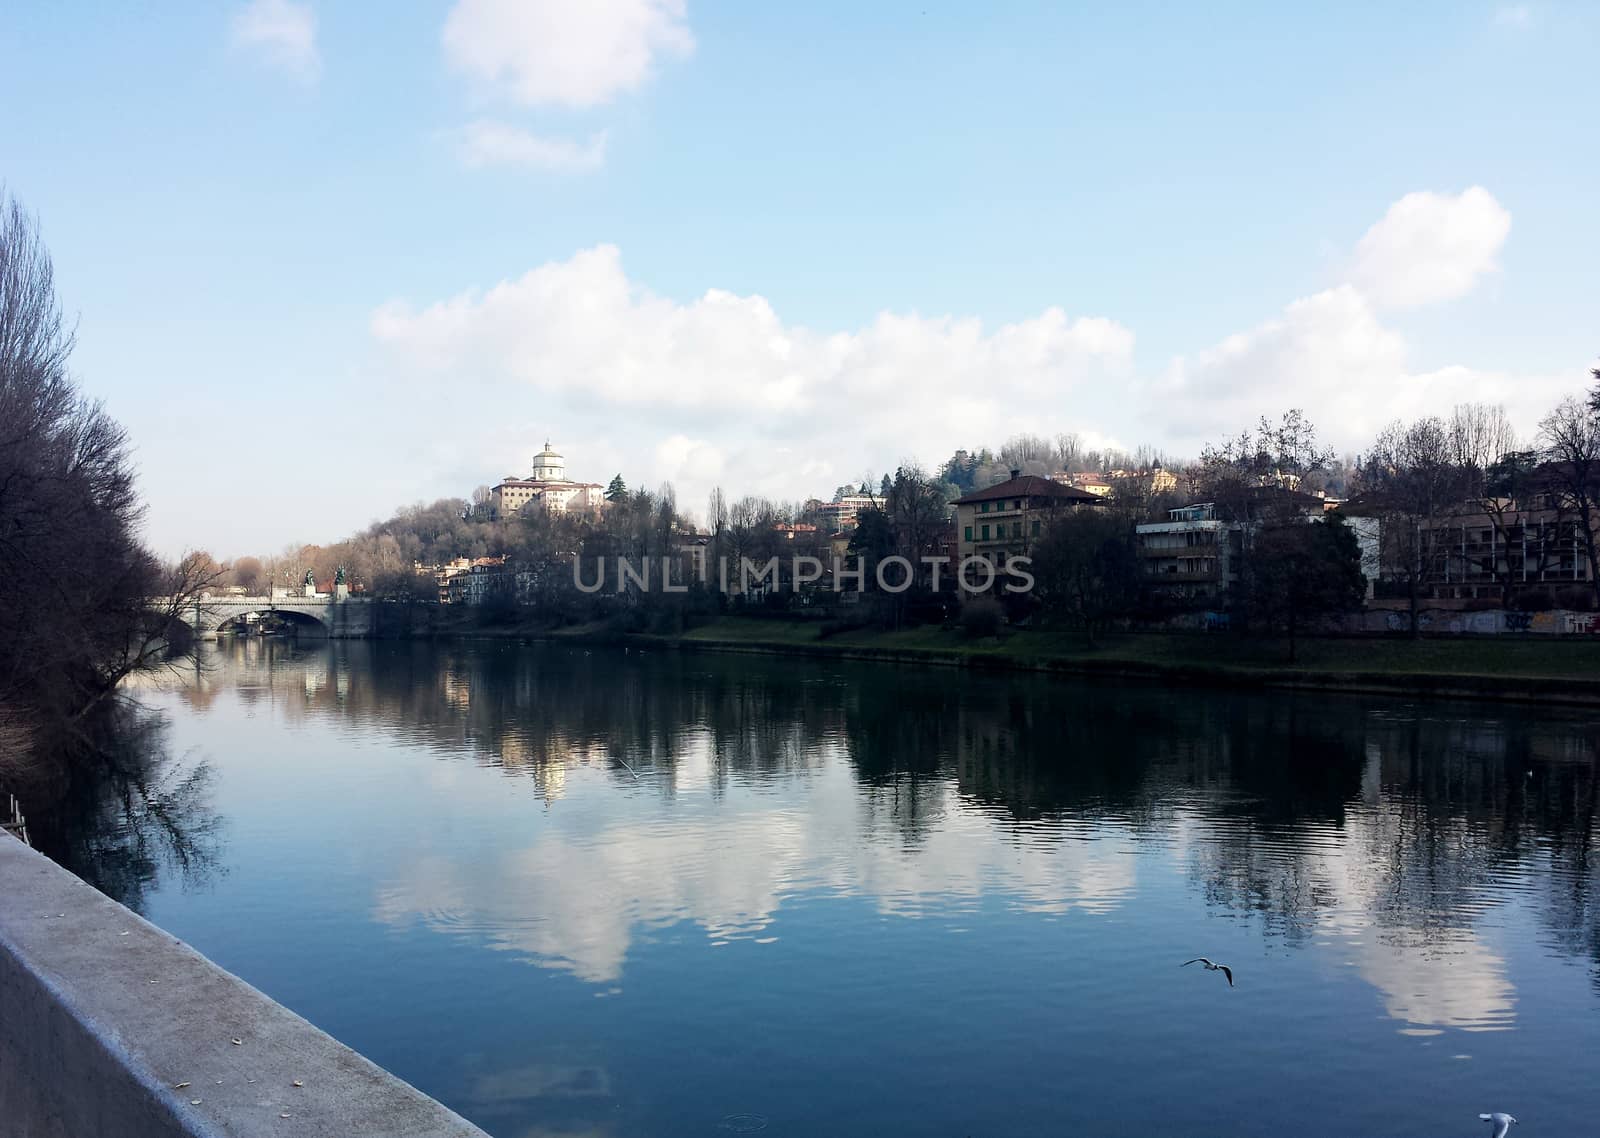 View of Po river in Turin, Italy.

Picture taken on October 28, 2013.